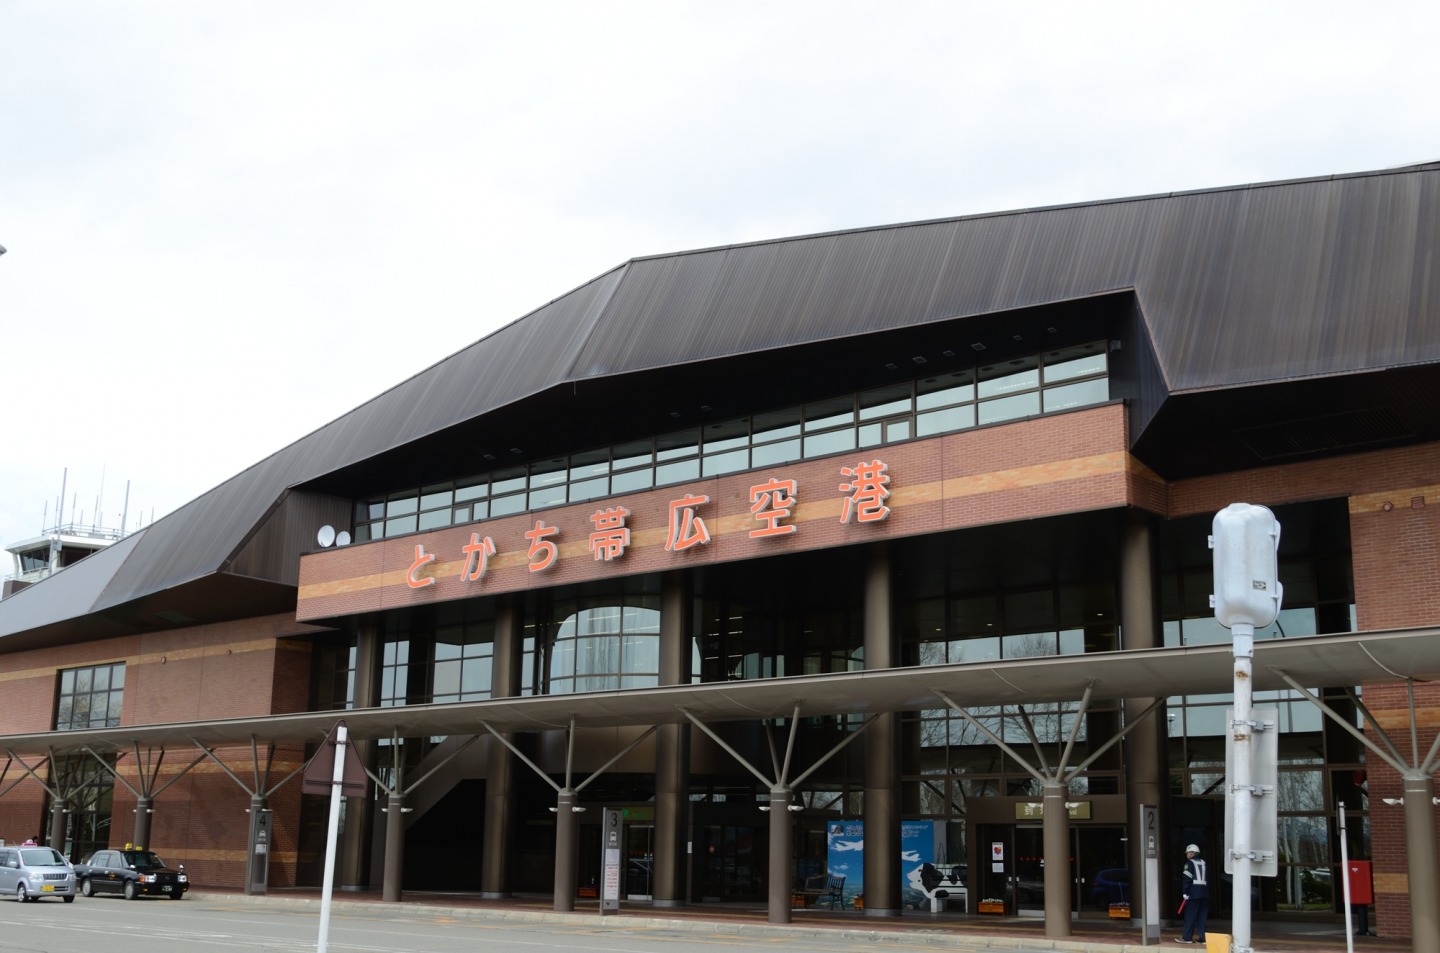 Obihiro Airport: Your Access Point to the Tokachi Area